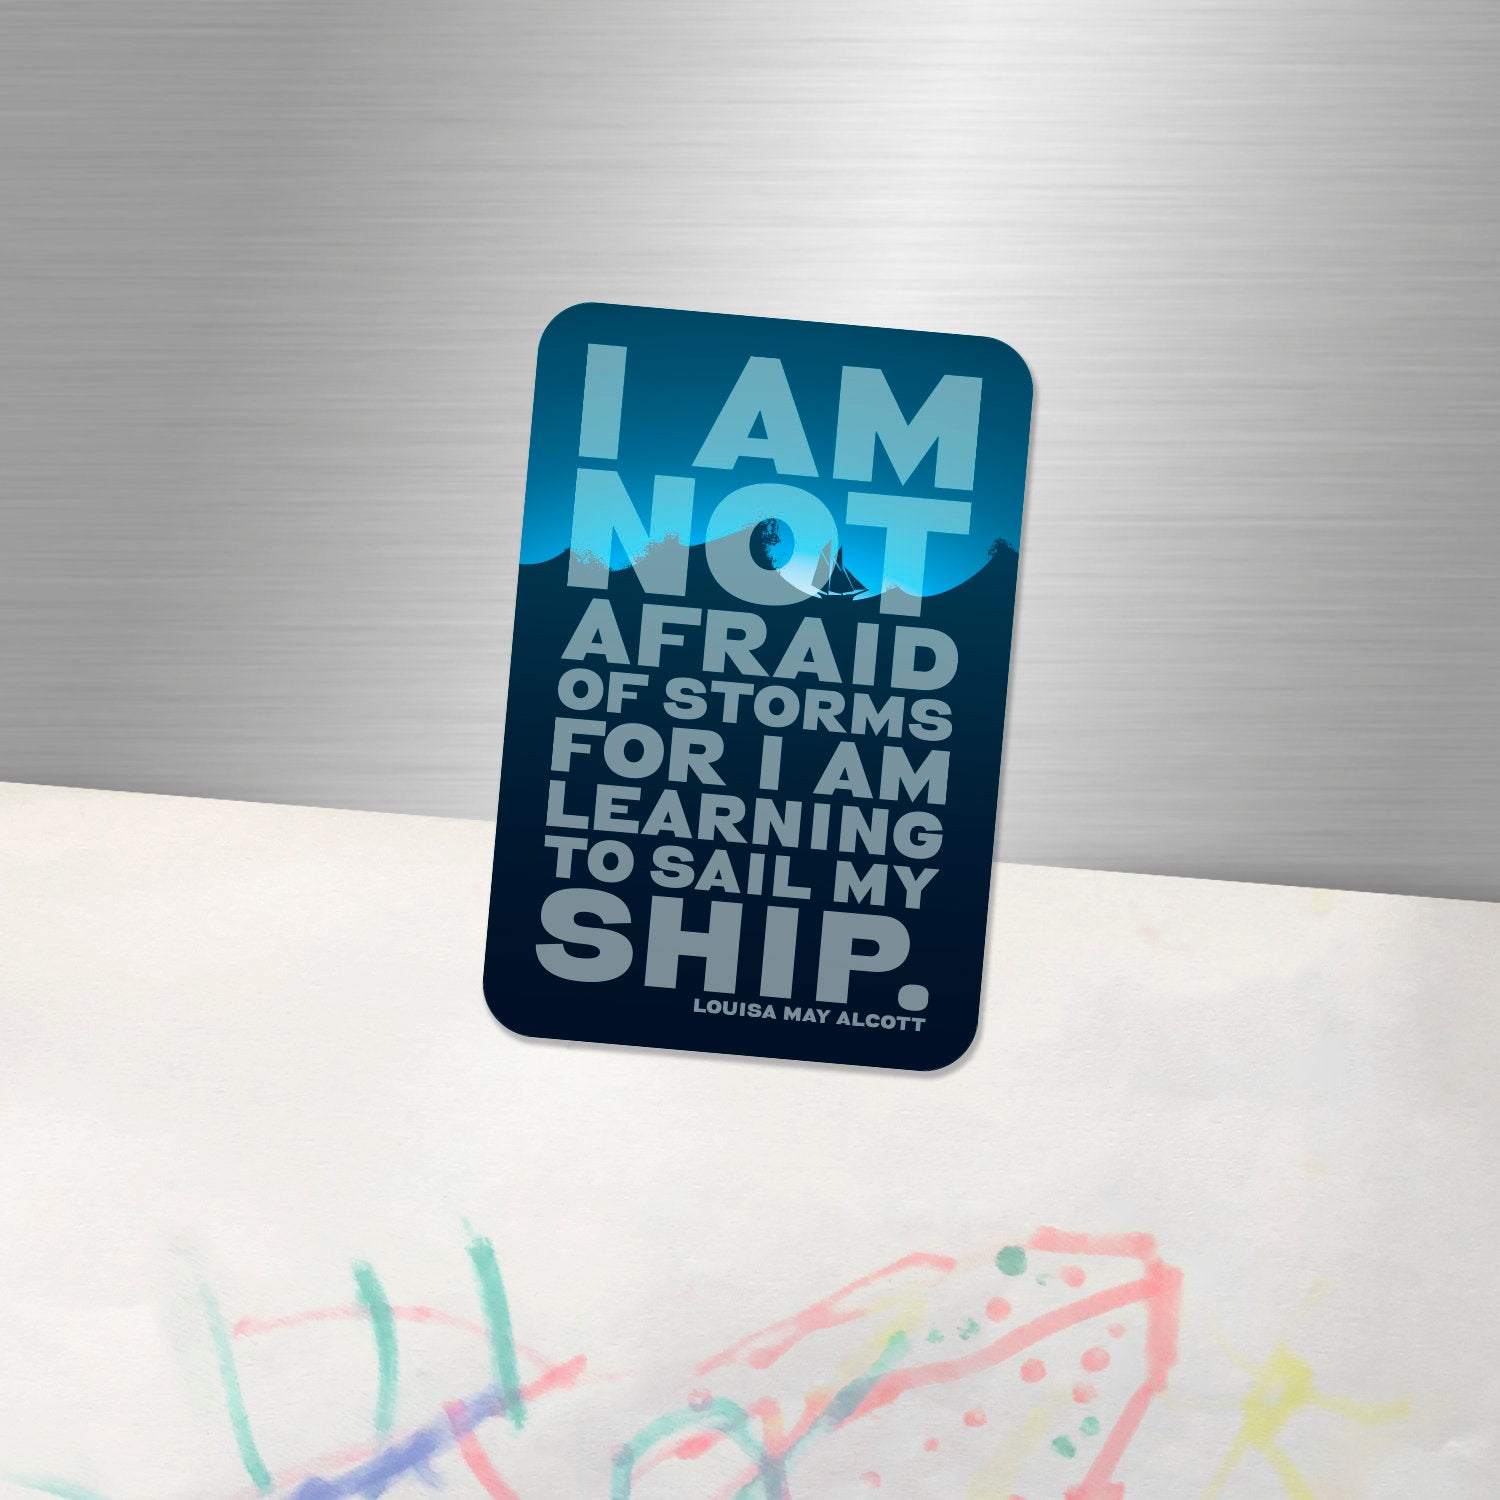 Fridge Magnet "I am not Afraid of Storms for I am learning to sail my ship" - Louisa May Alcott